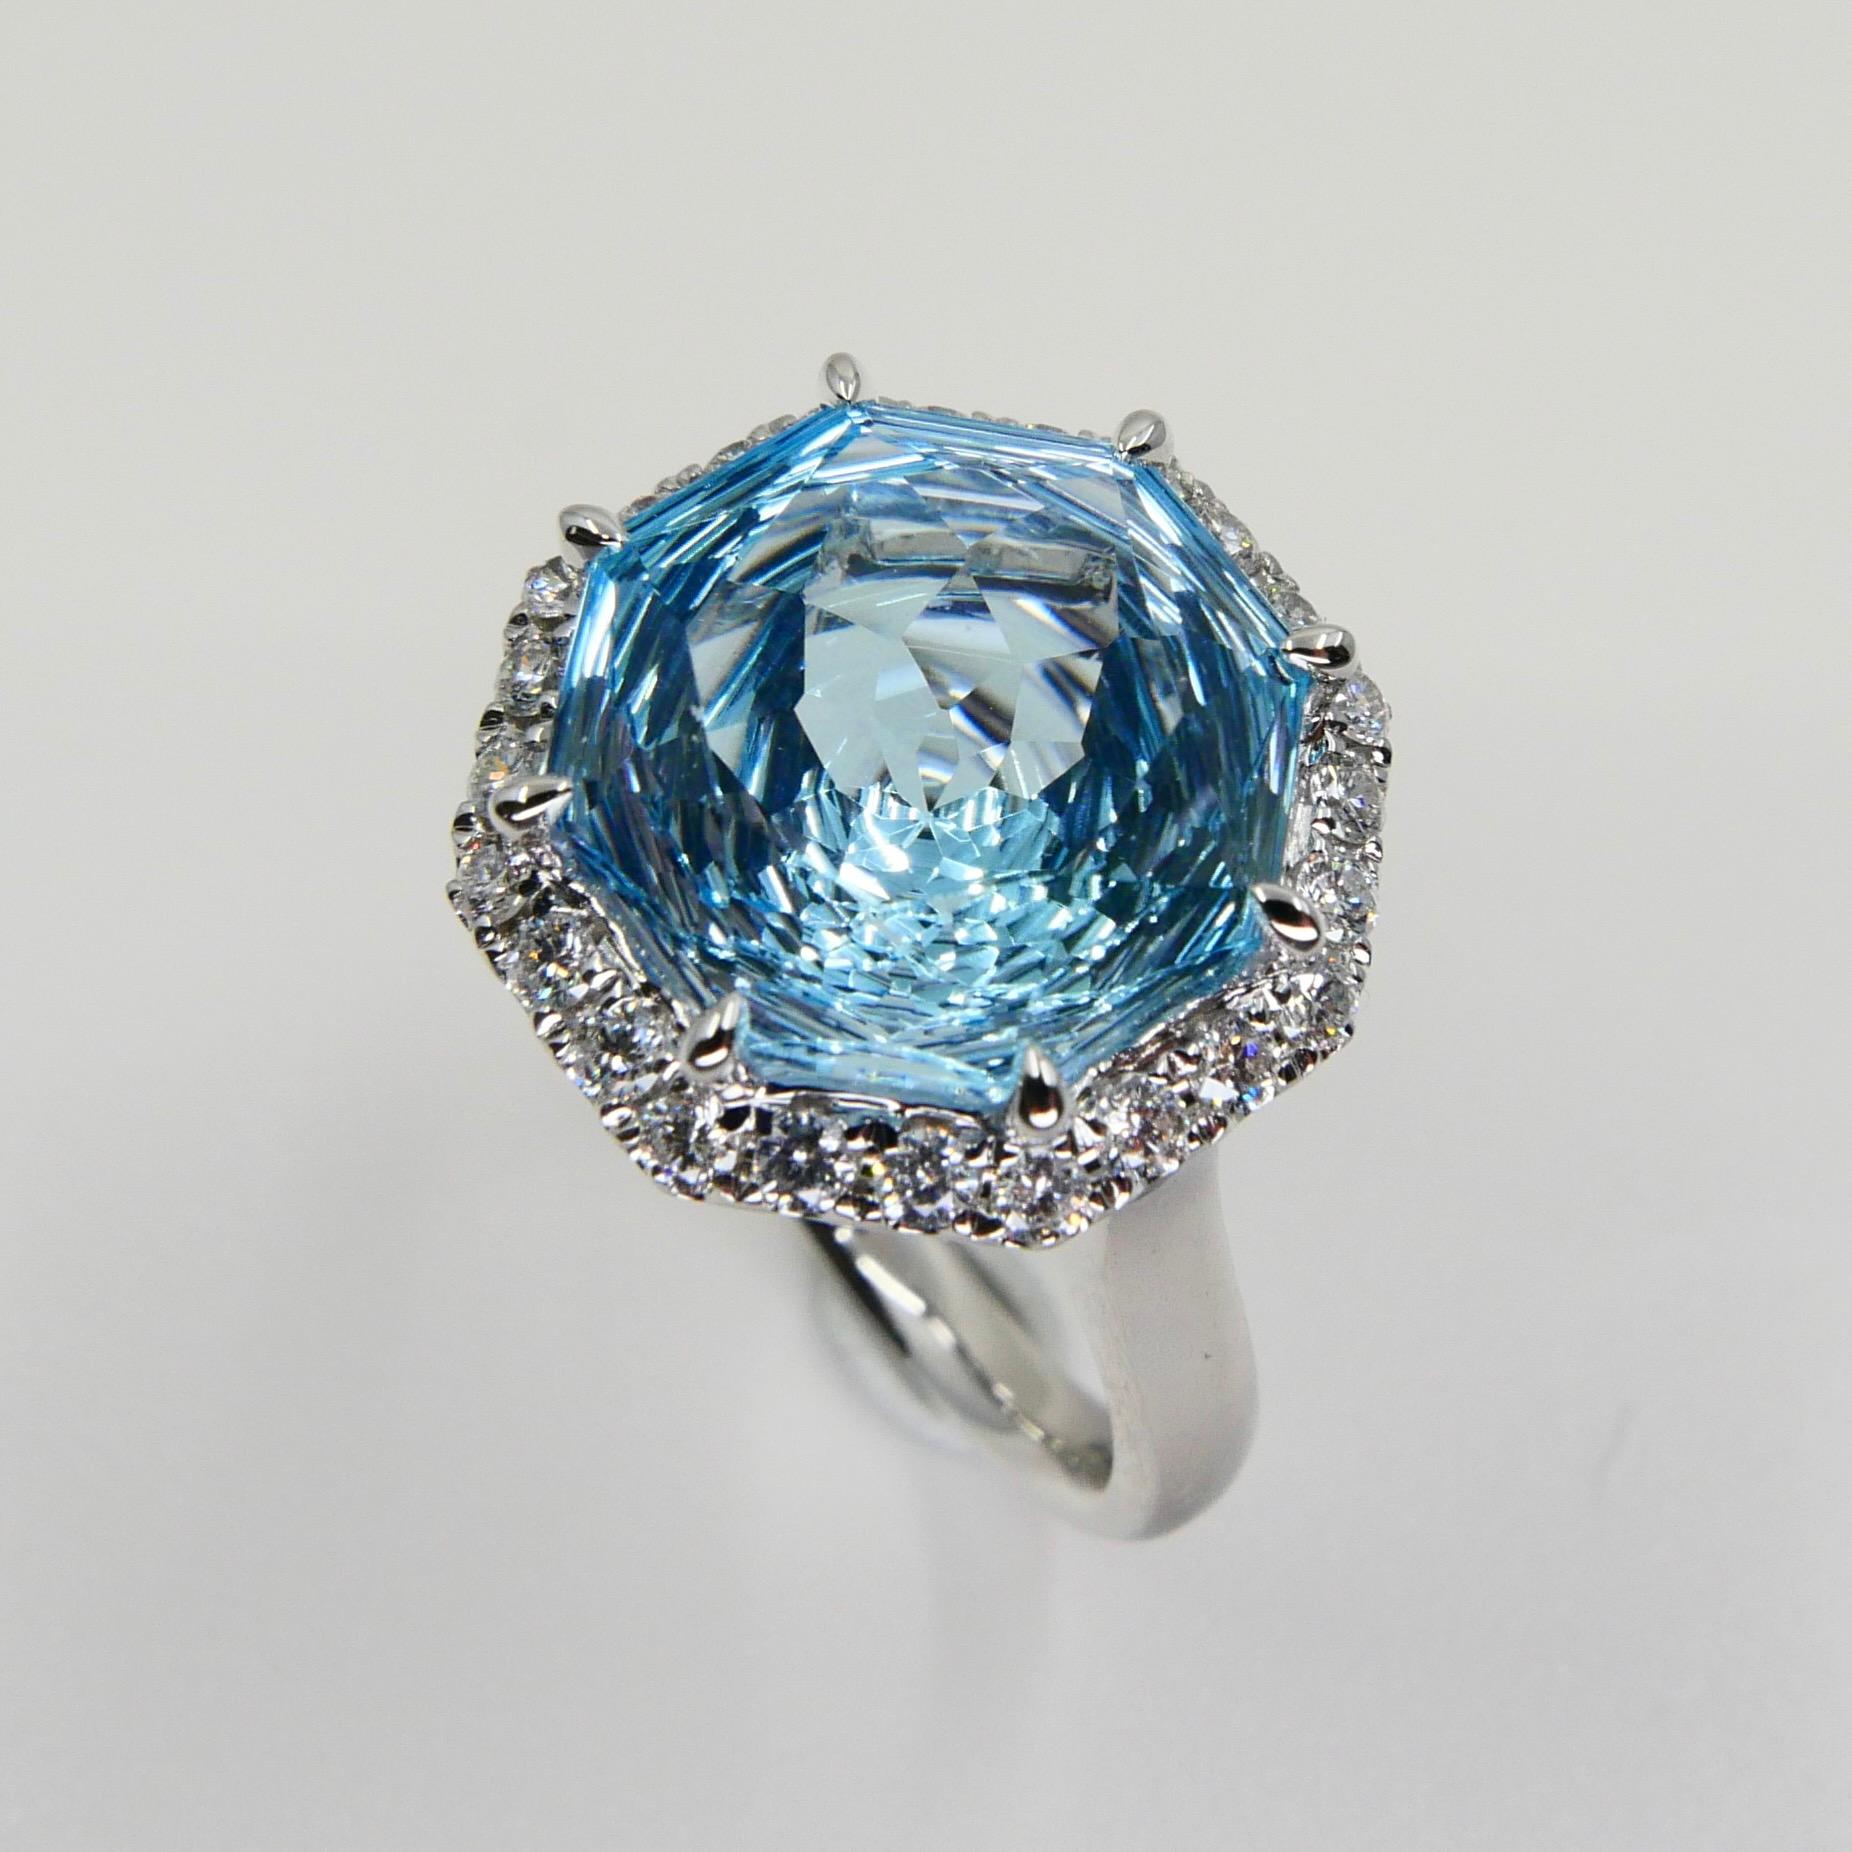 Contemporary Flower Cut Powder Blue Topaz 7.86 Cts and Diamond Cocktail Ring, Statement Ring For Sale